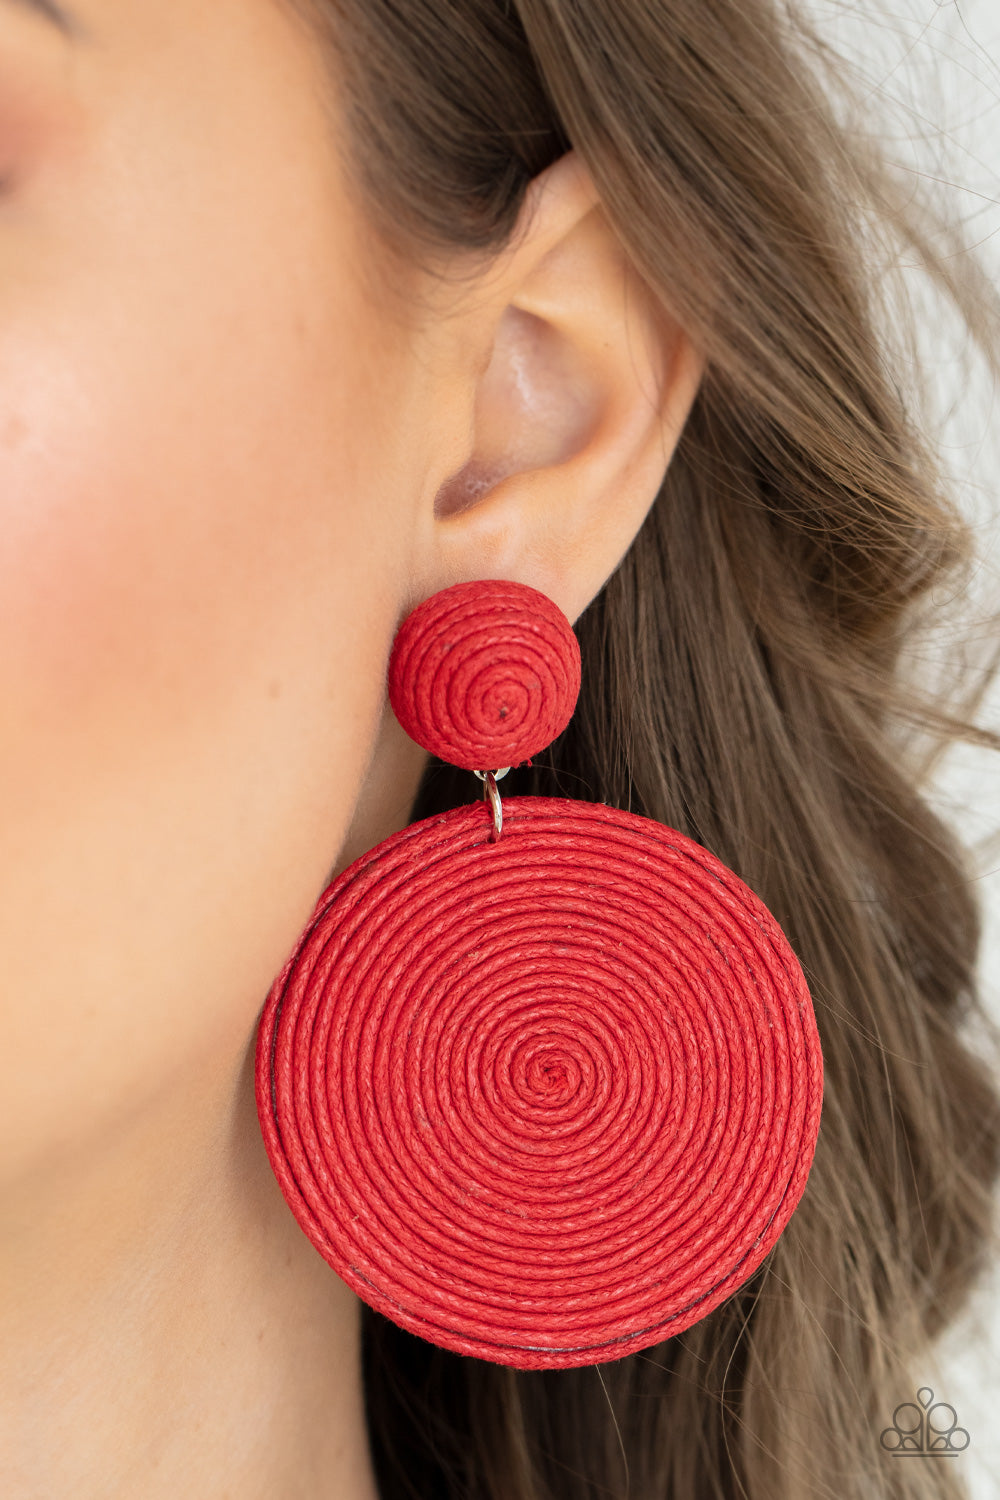 Circulate The Room Red Paparazzi Earrings Cashmere Pink Jewels